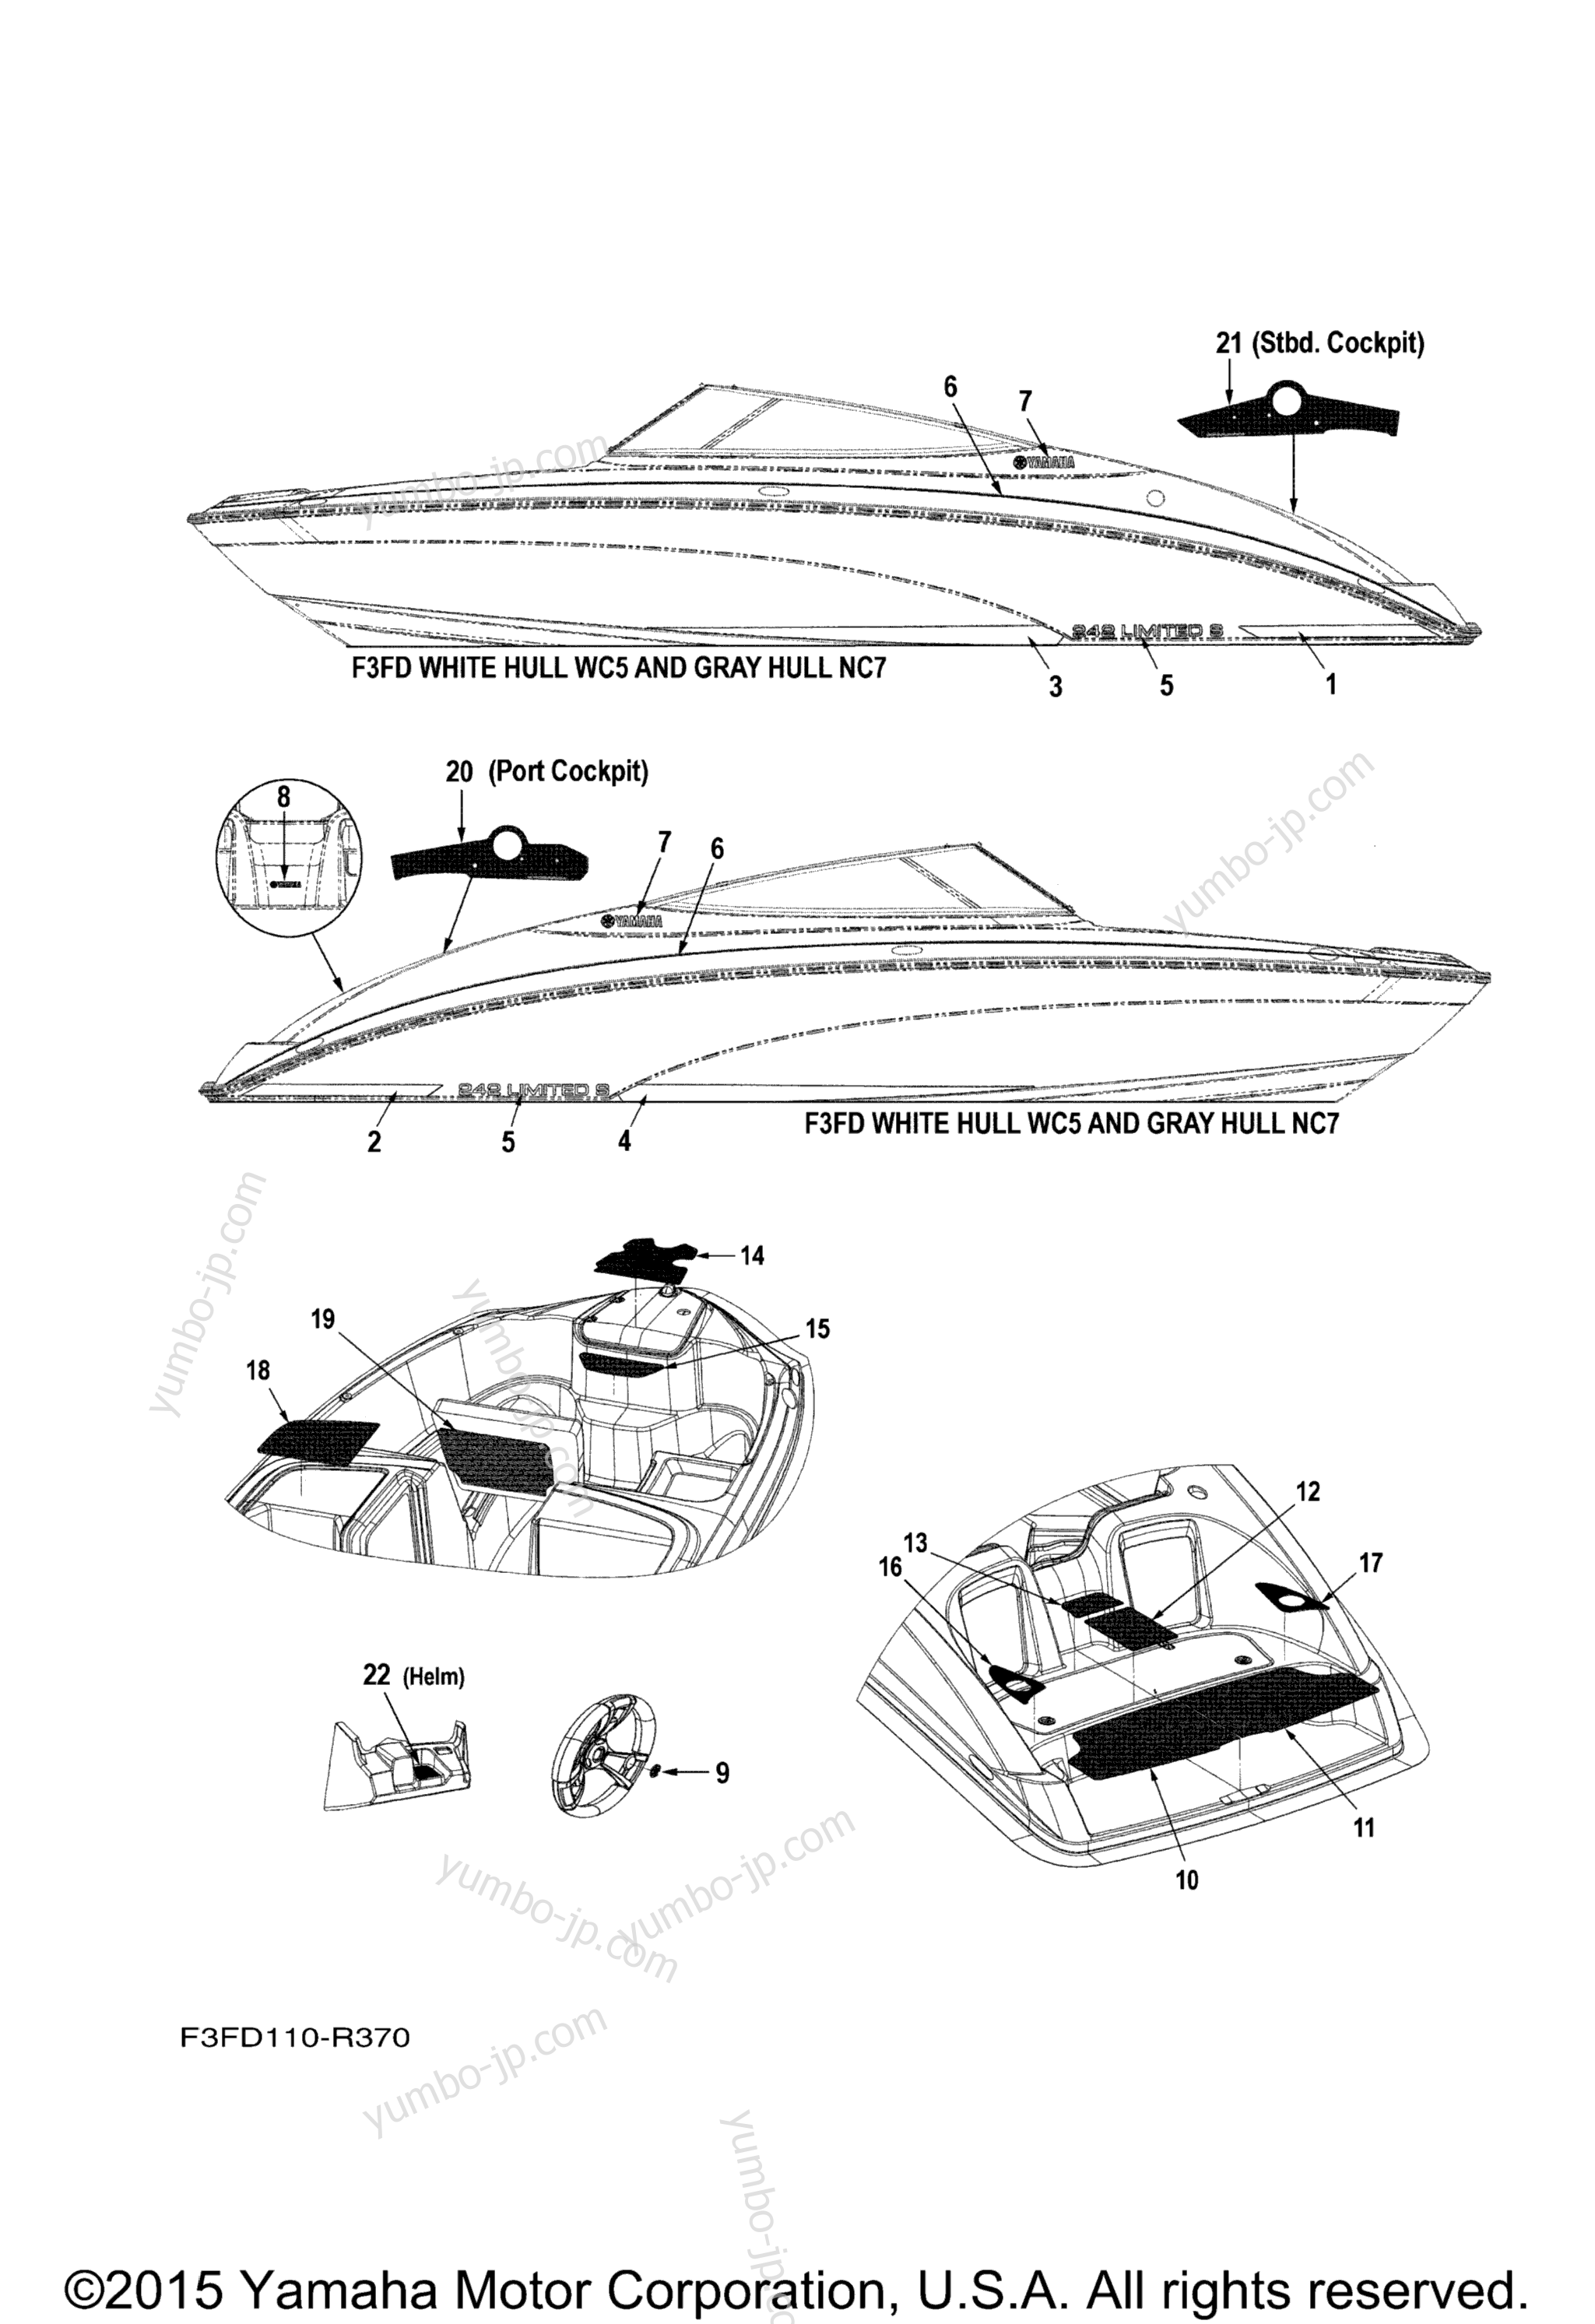 Graphics & Mats for boats YAMAHA 242 LIMITED S (SAT1800CR) 2016 year